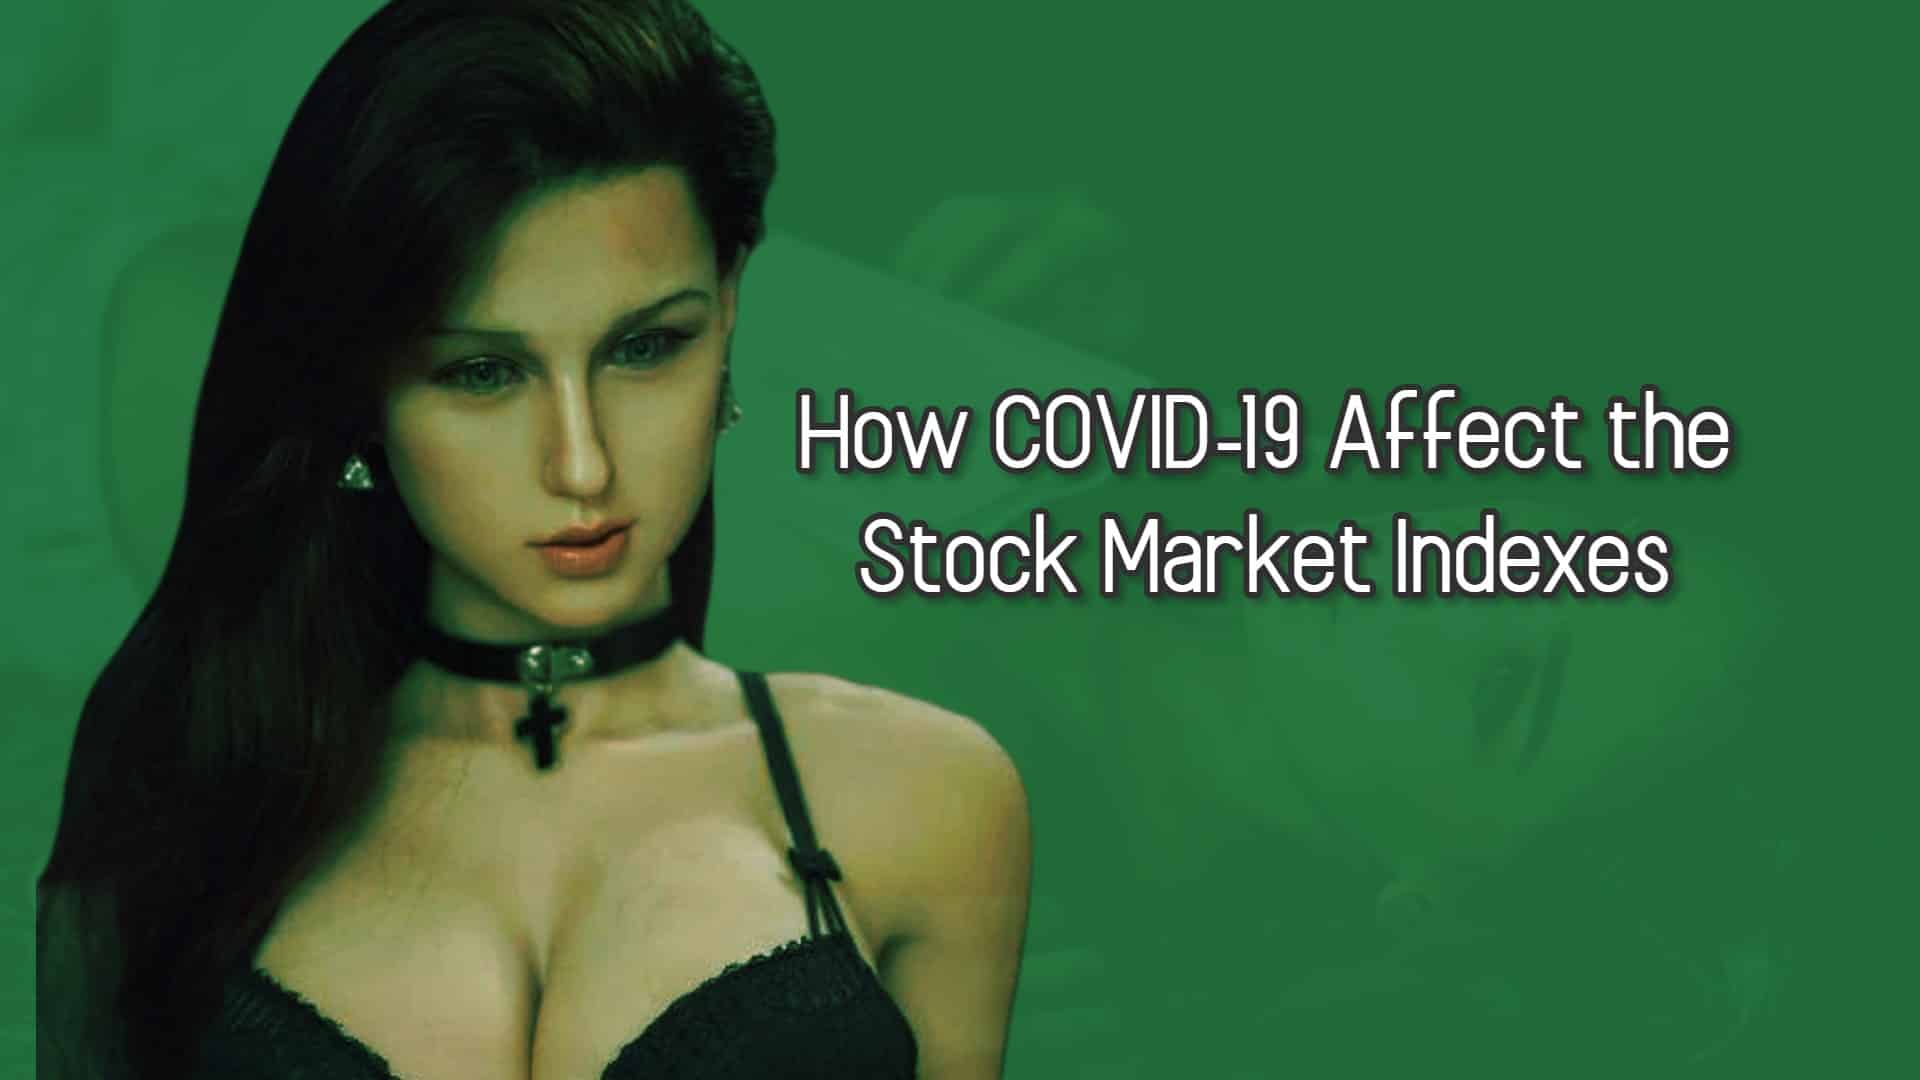 How COVID-19 Affects The Stock Market Indexes